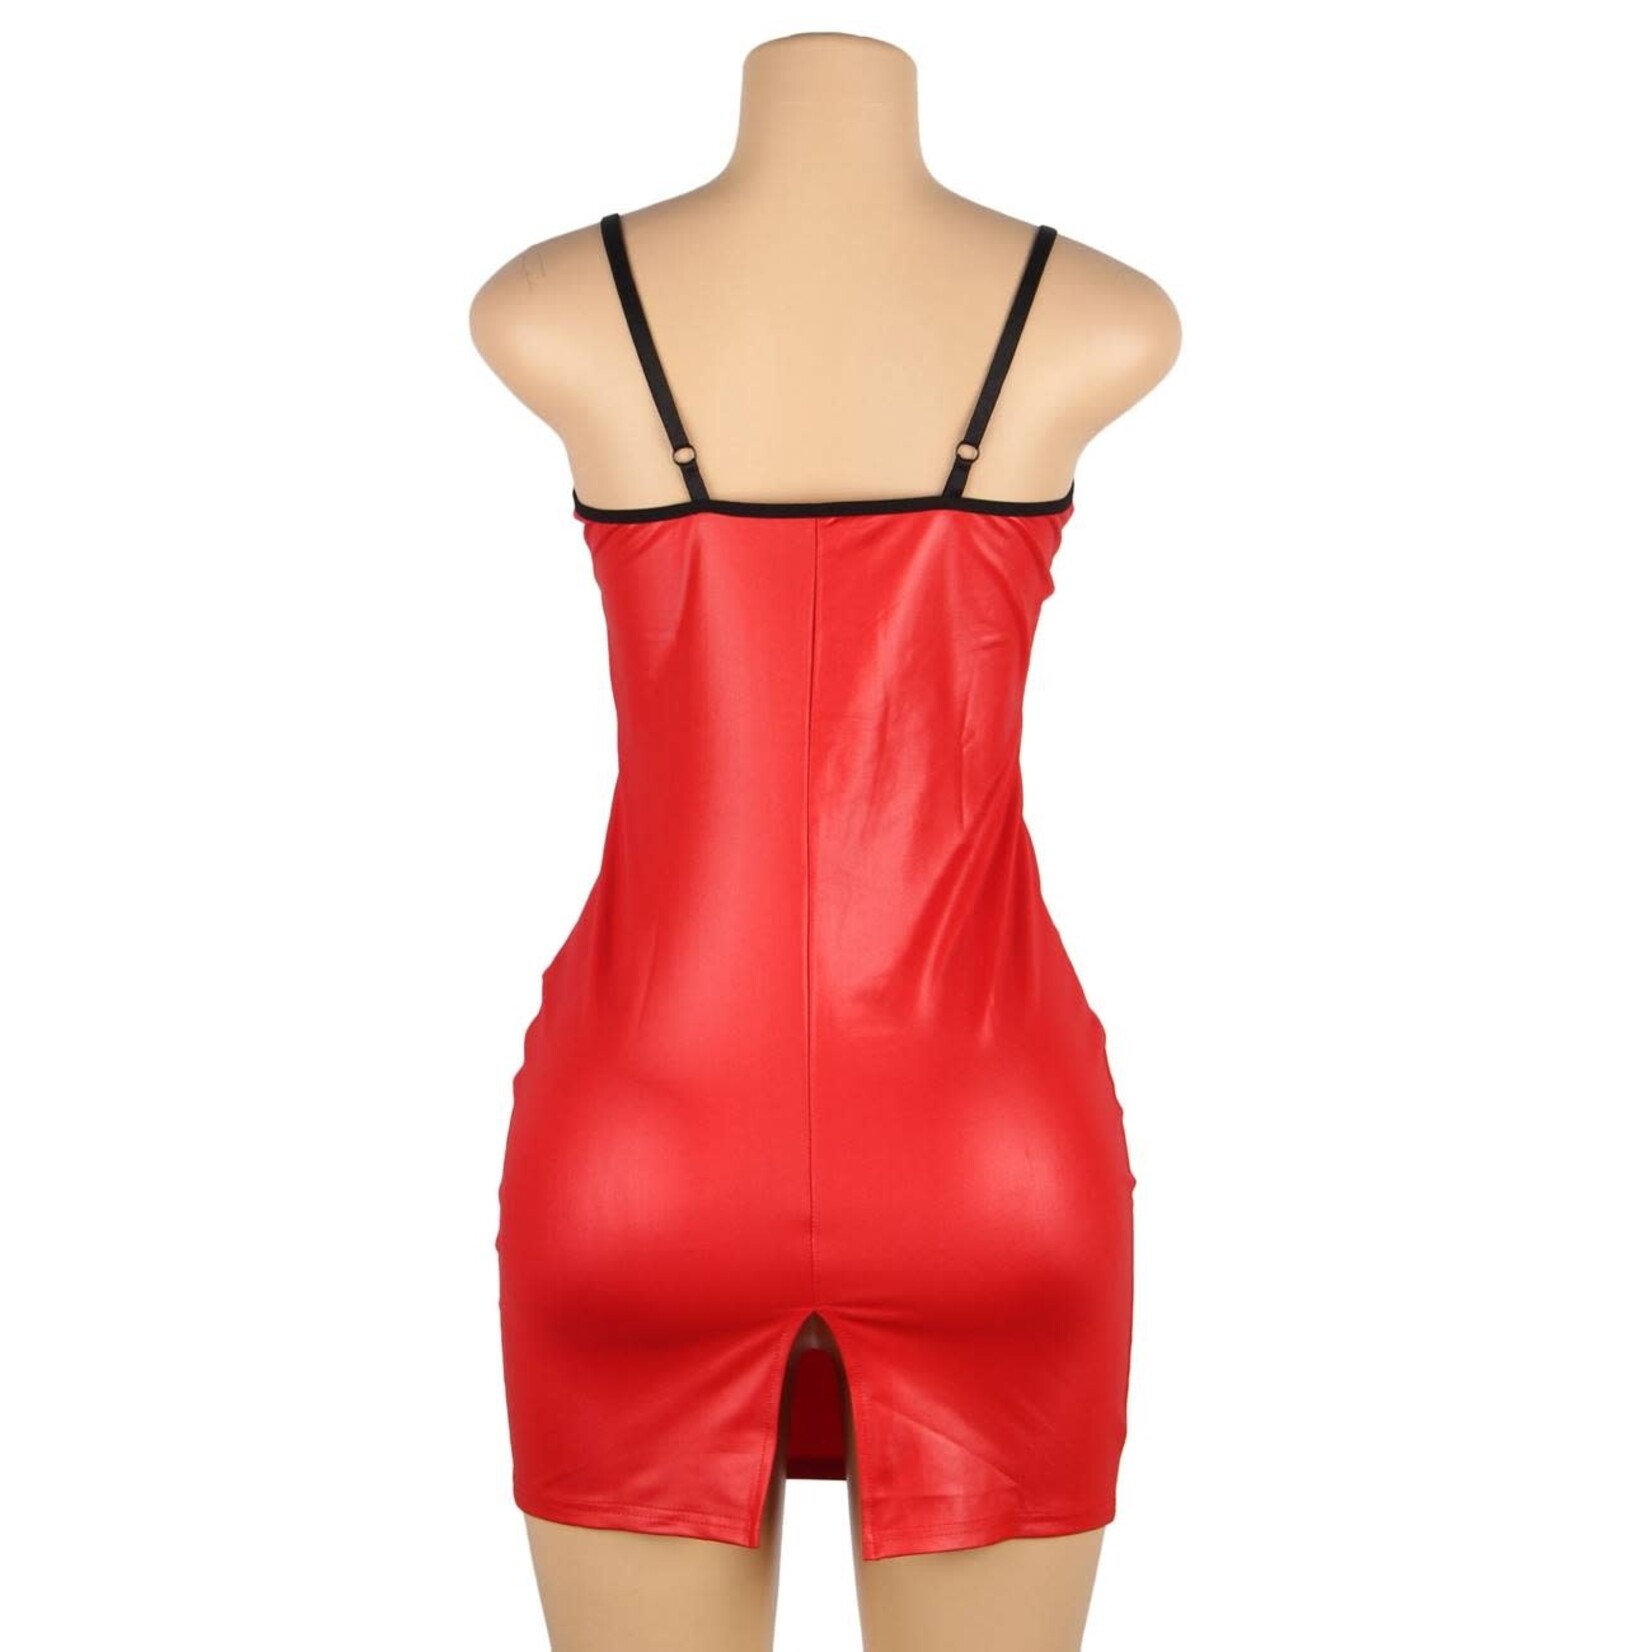 OH YEAH! -  SEXY BAG HIP TIGHT NIGHTCLUB PLUS SIZE RED LEATHER SKIRT XL-2XL